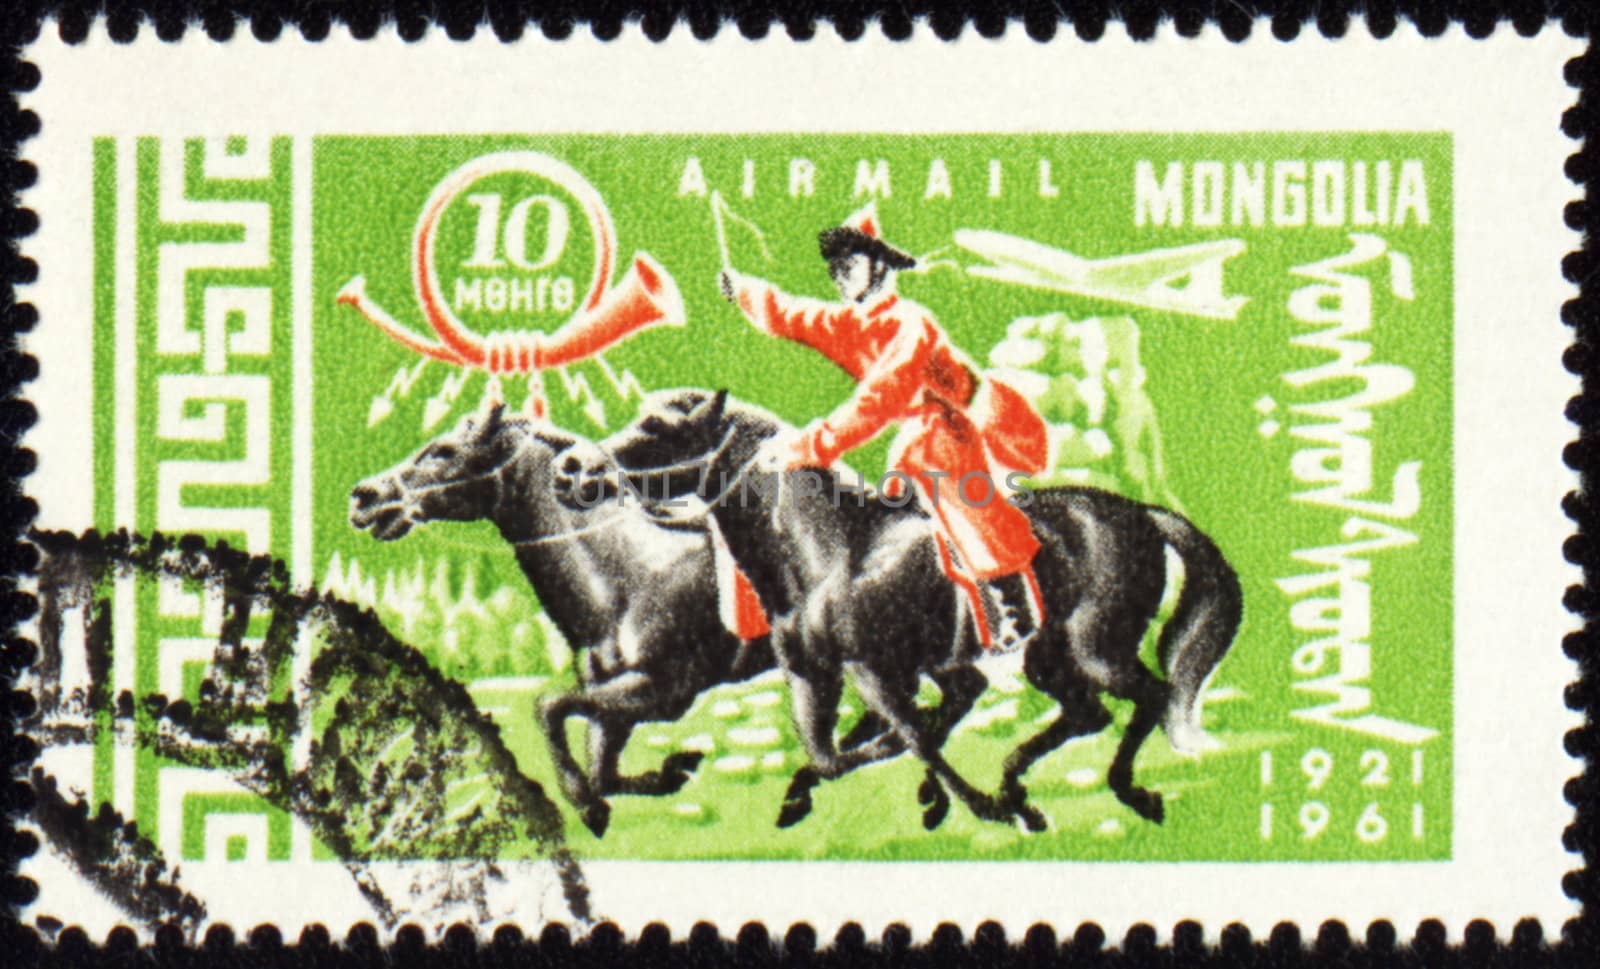 Post stamp with Mongolian horseman by wander